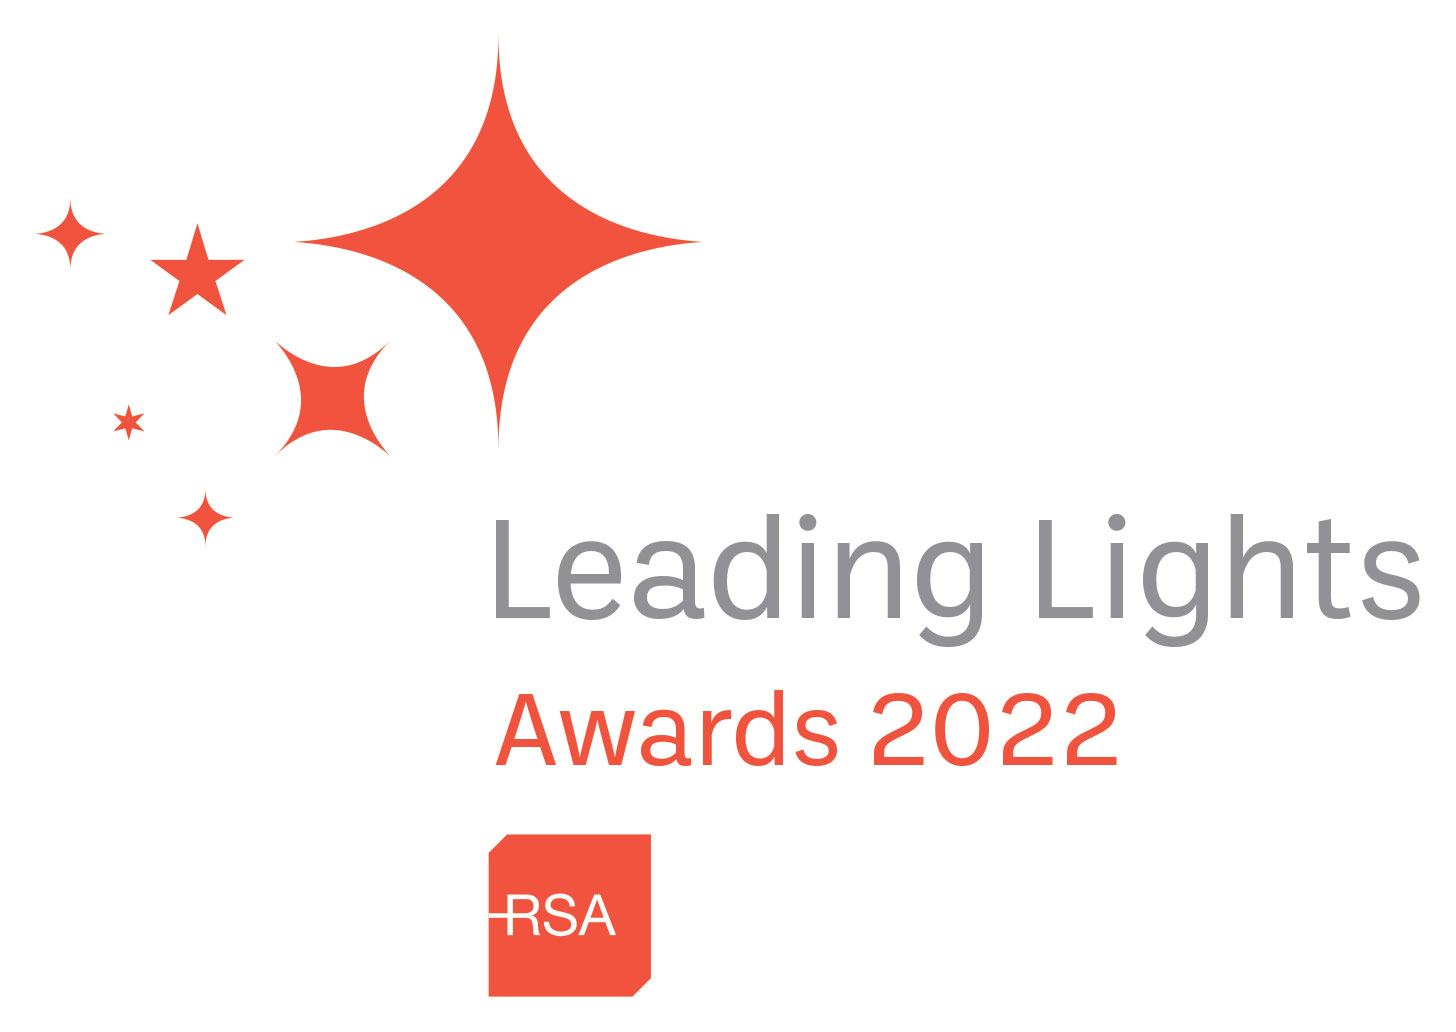 Leading lights in road safety awards